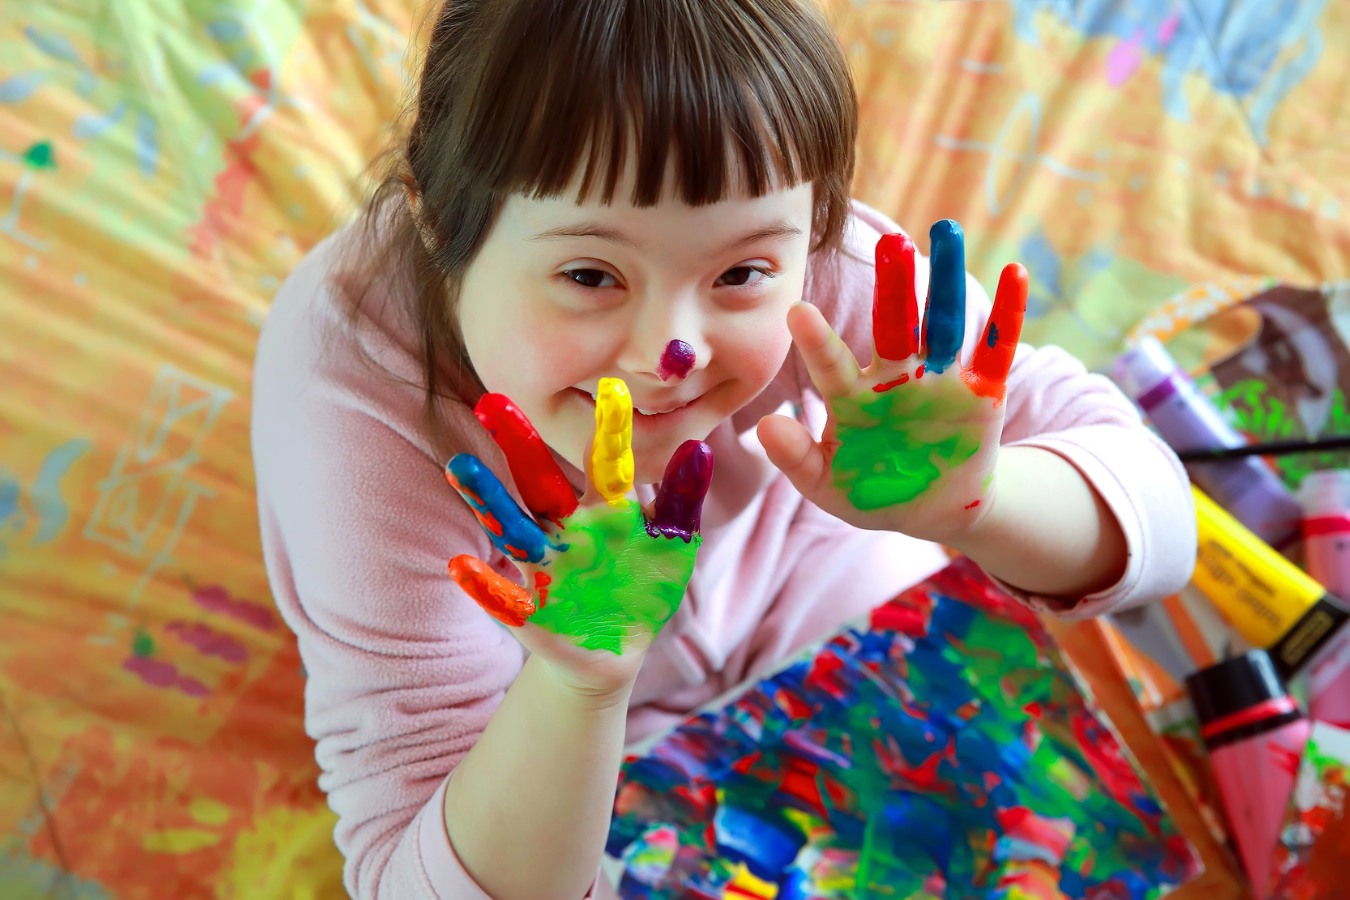 A young girl with Down Syndrome plays with rainbow paint and is smiling. Sparkrock 365, an ERP system for Human Services organizations, helps administrators eliminate burdensome tasks and focus on what they do best - helping people.